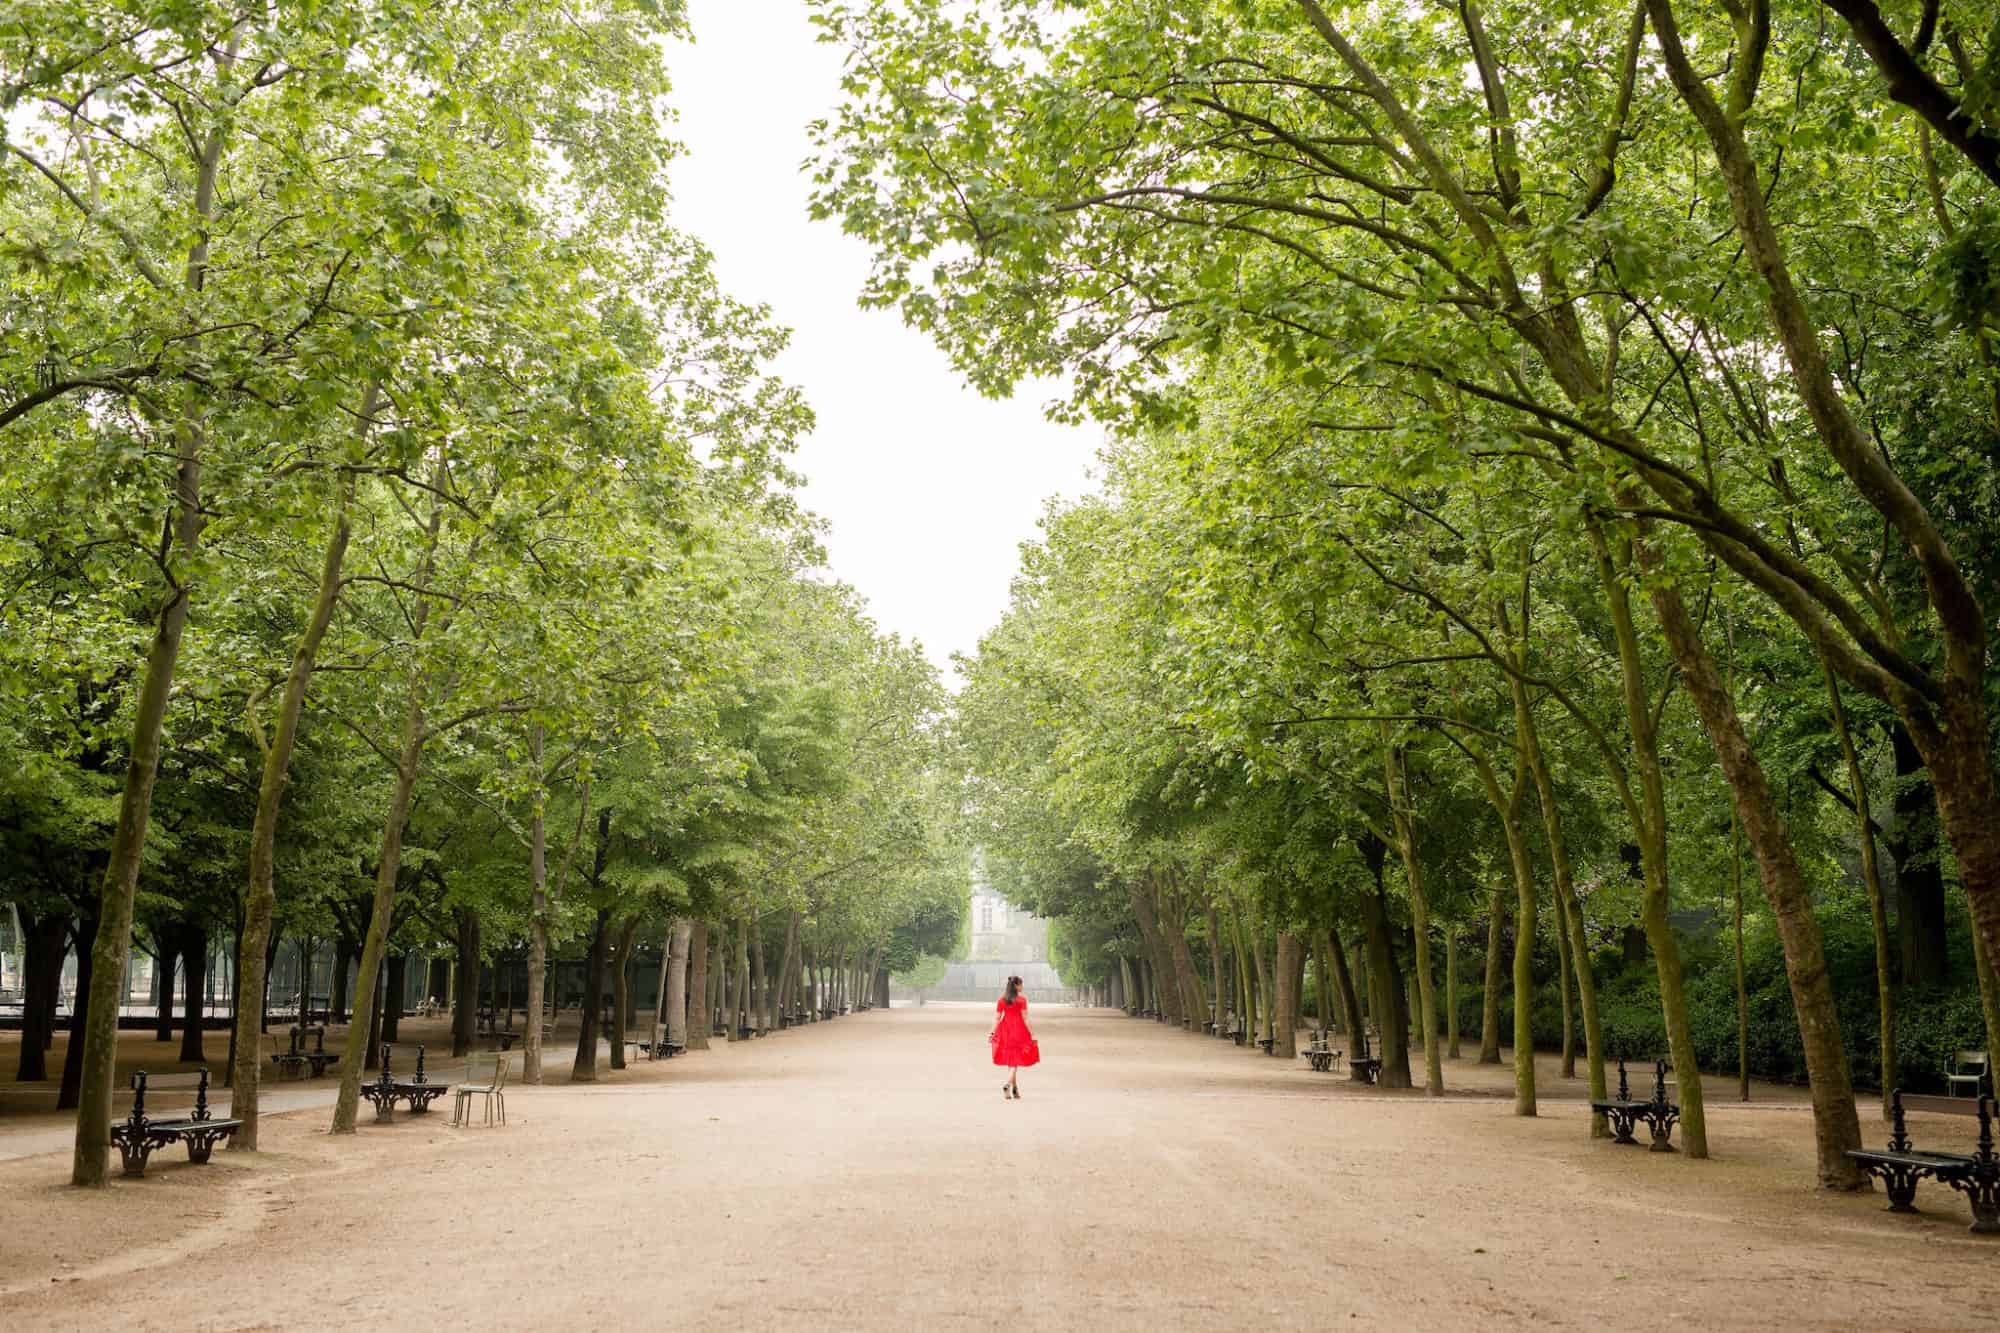 Rebecca Plotnick, travel photographer and blogger at Everyday Parisian, takes a twirl in an empty Tuileries garden, her bright red dress punctuating the verdant trees. 